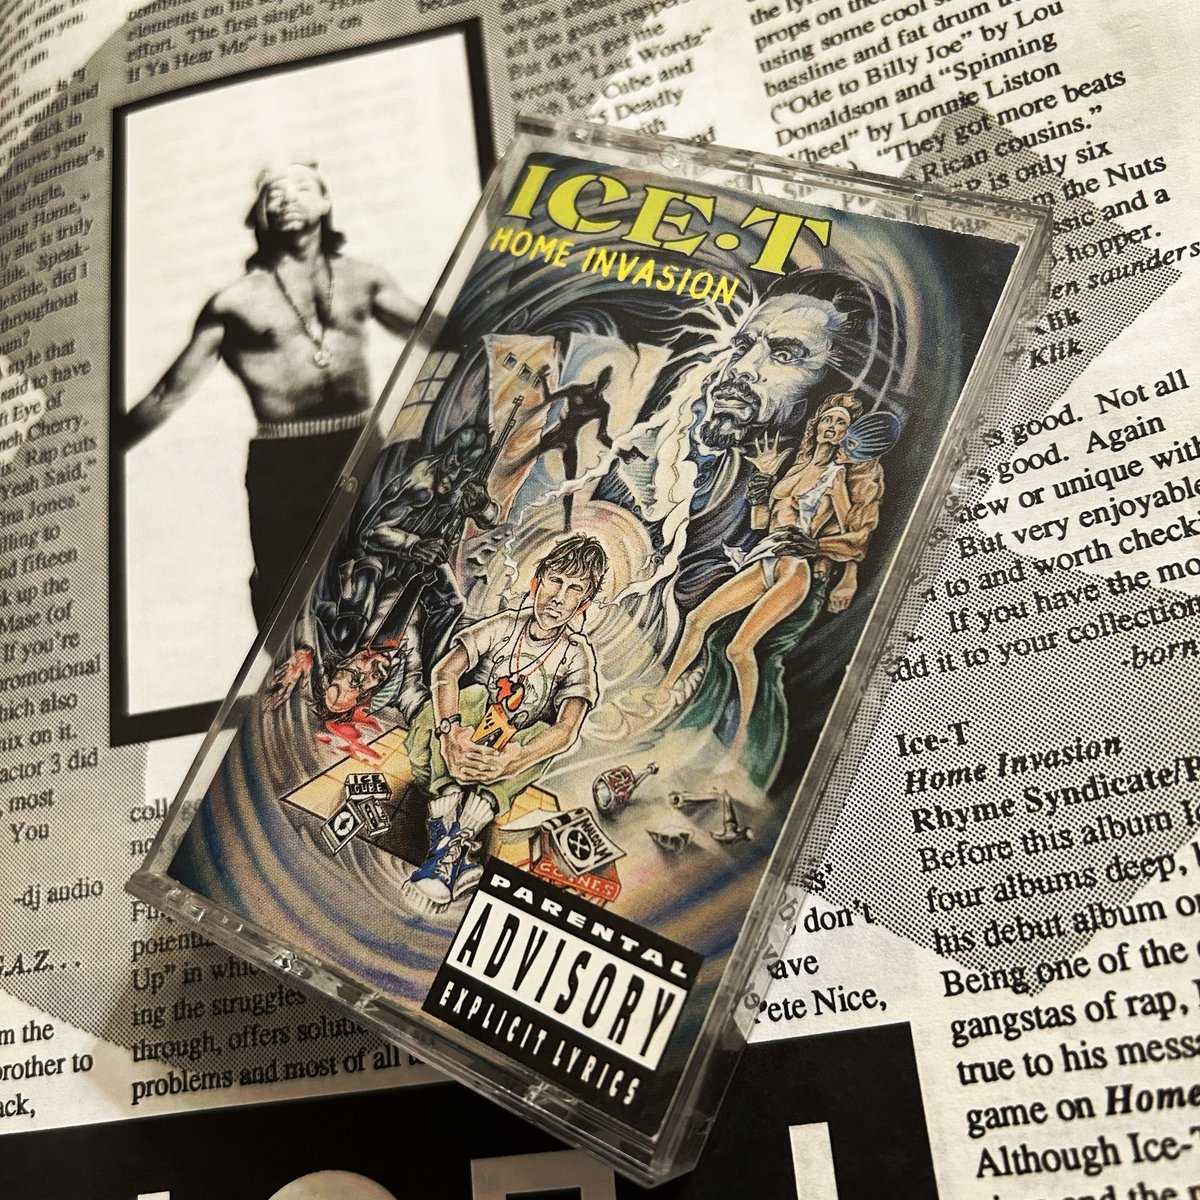 Ice T Home Invasion review in The Flavor @FINALLEVEL @Djevile1anonly @AfrikaIslam @hengeegarcia @donalddbronx @Grip_sta 
#rhyme #syndicate #priority #records #true #message #homeinvasion #classic #hiphop #theflavor #magazine #review #icet #hiphopgods